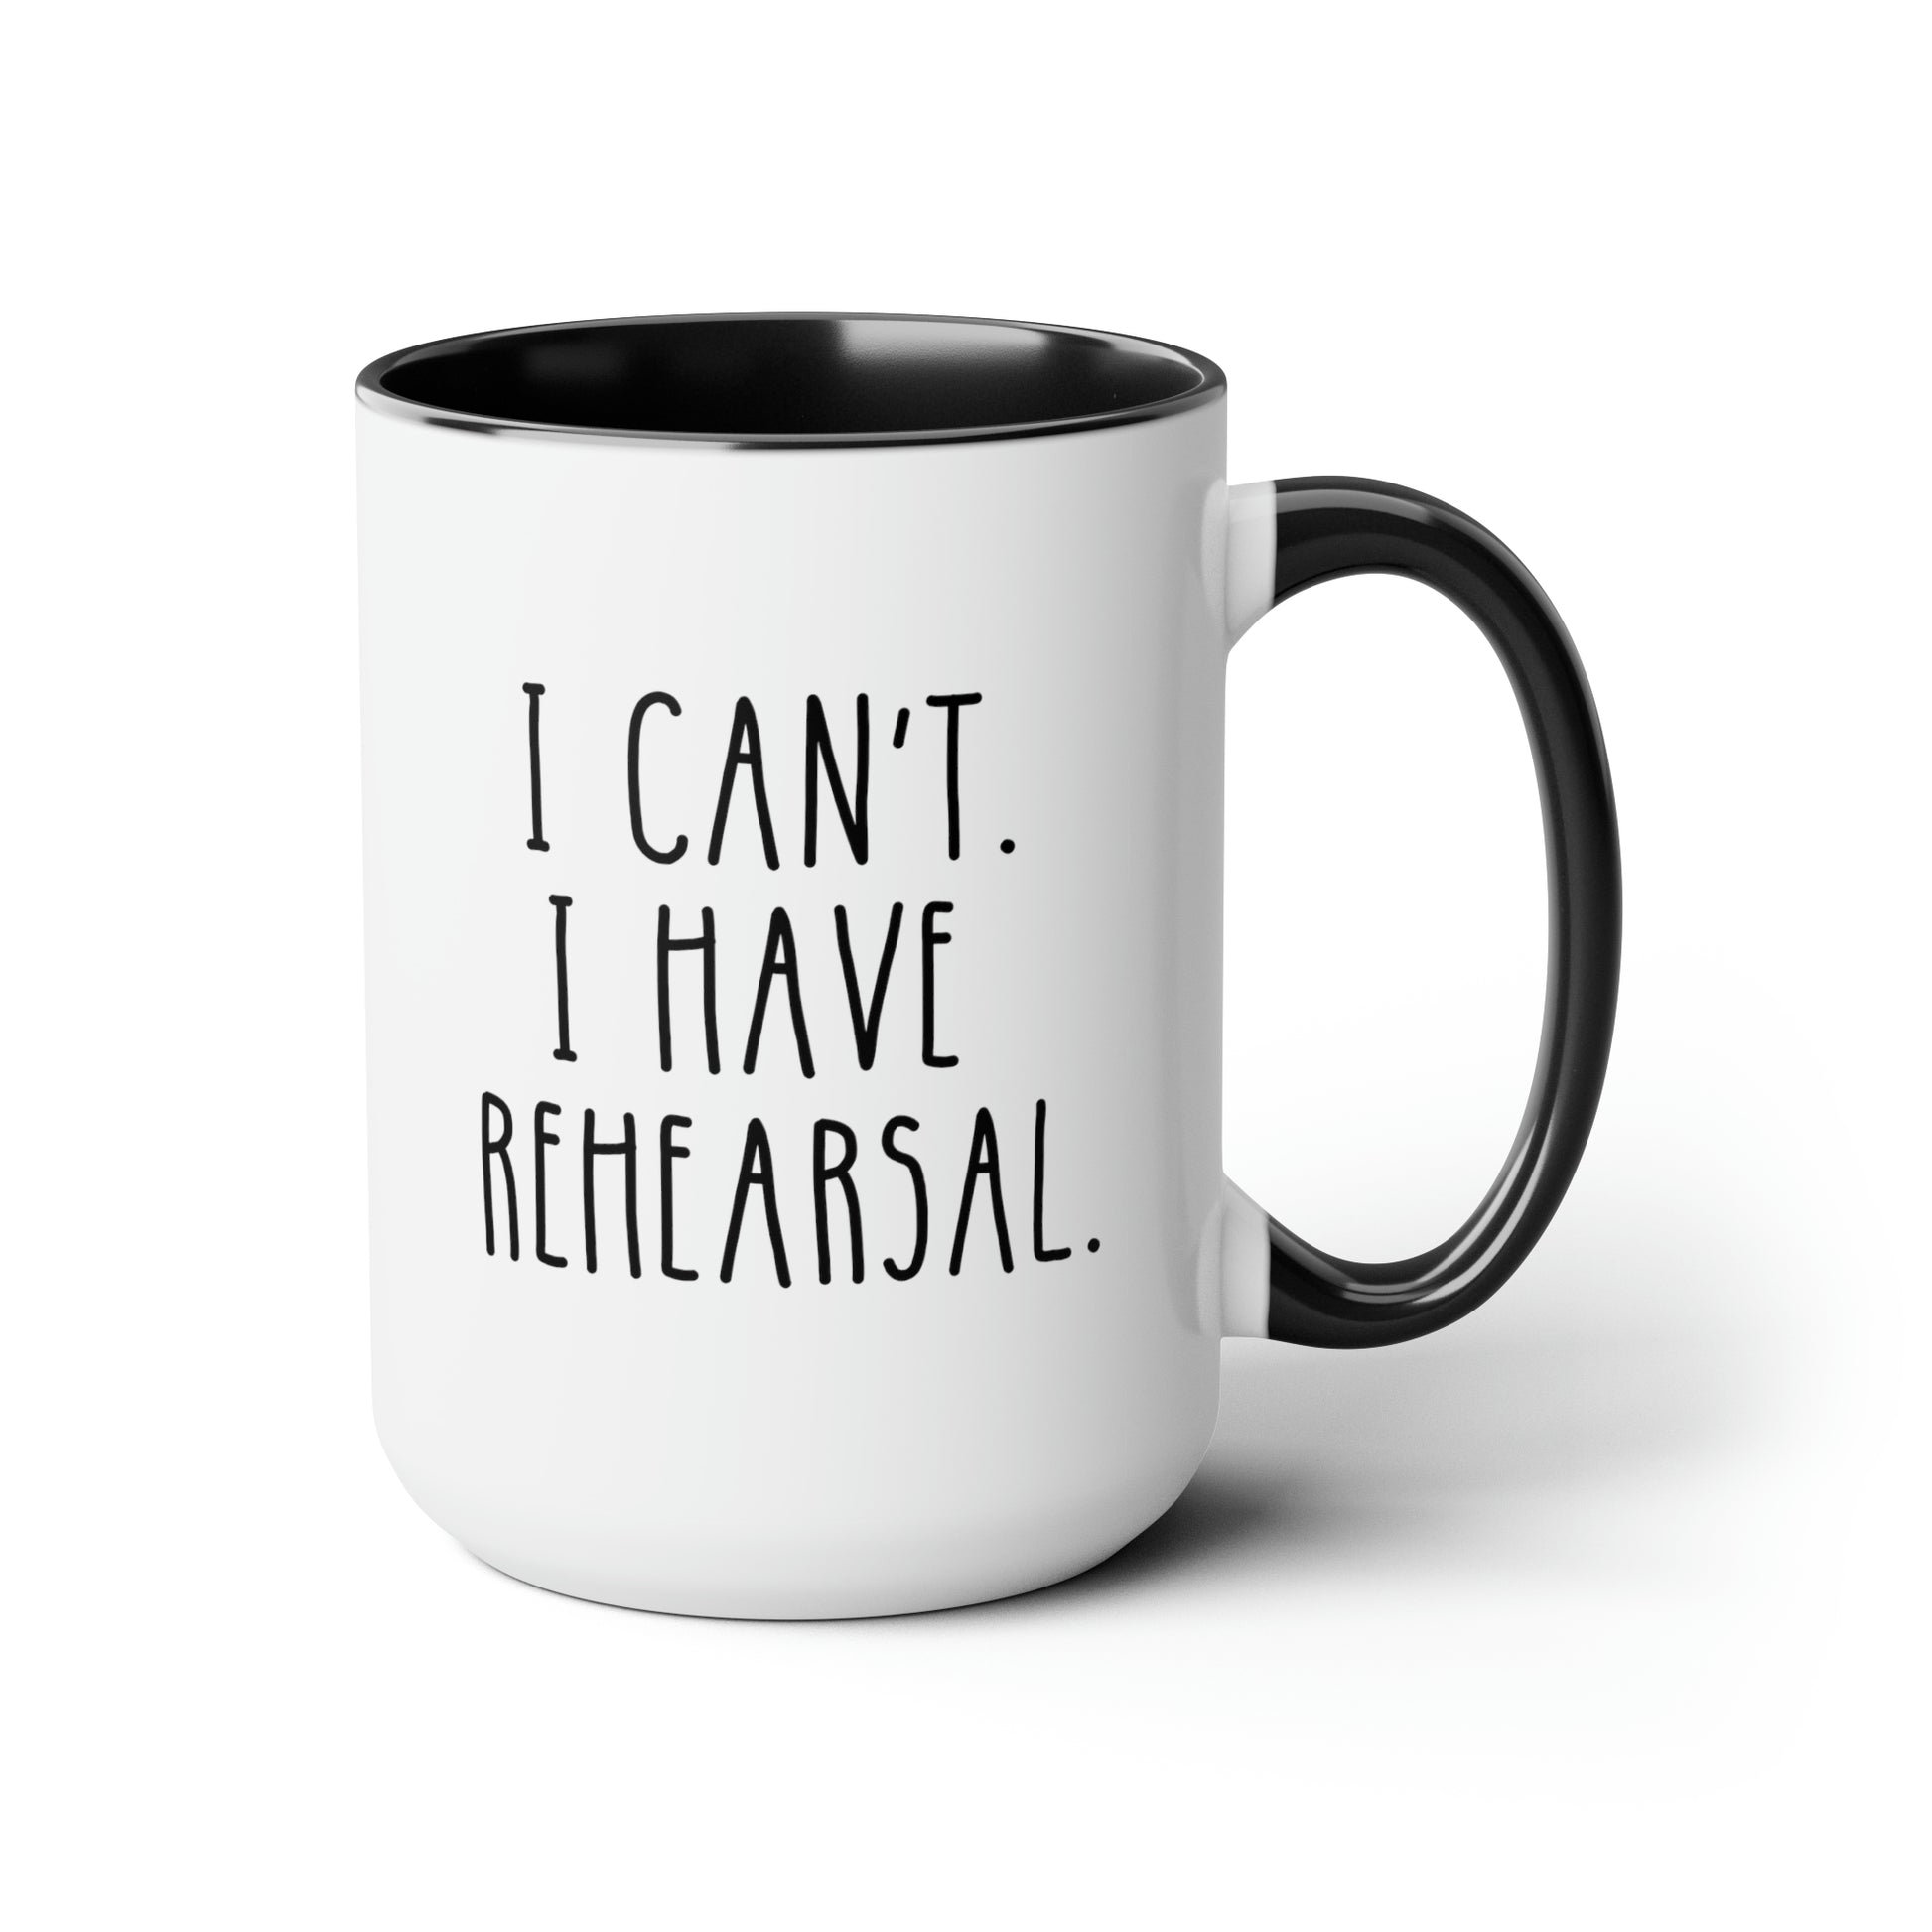 I Can't. I Have Rehearsal. 15oz white with black accent funny large coffee mug gift for theater actor actress dancer band singer waveywares wavey wares wavywares wavy wares